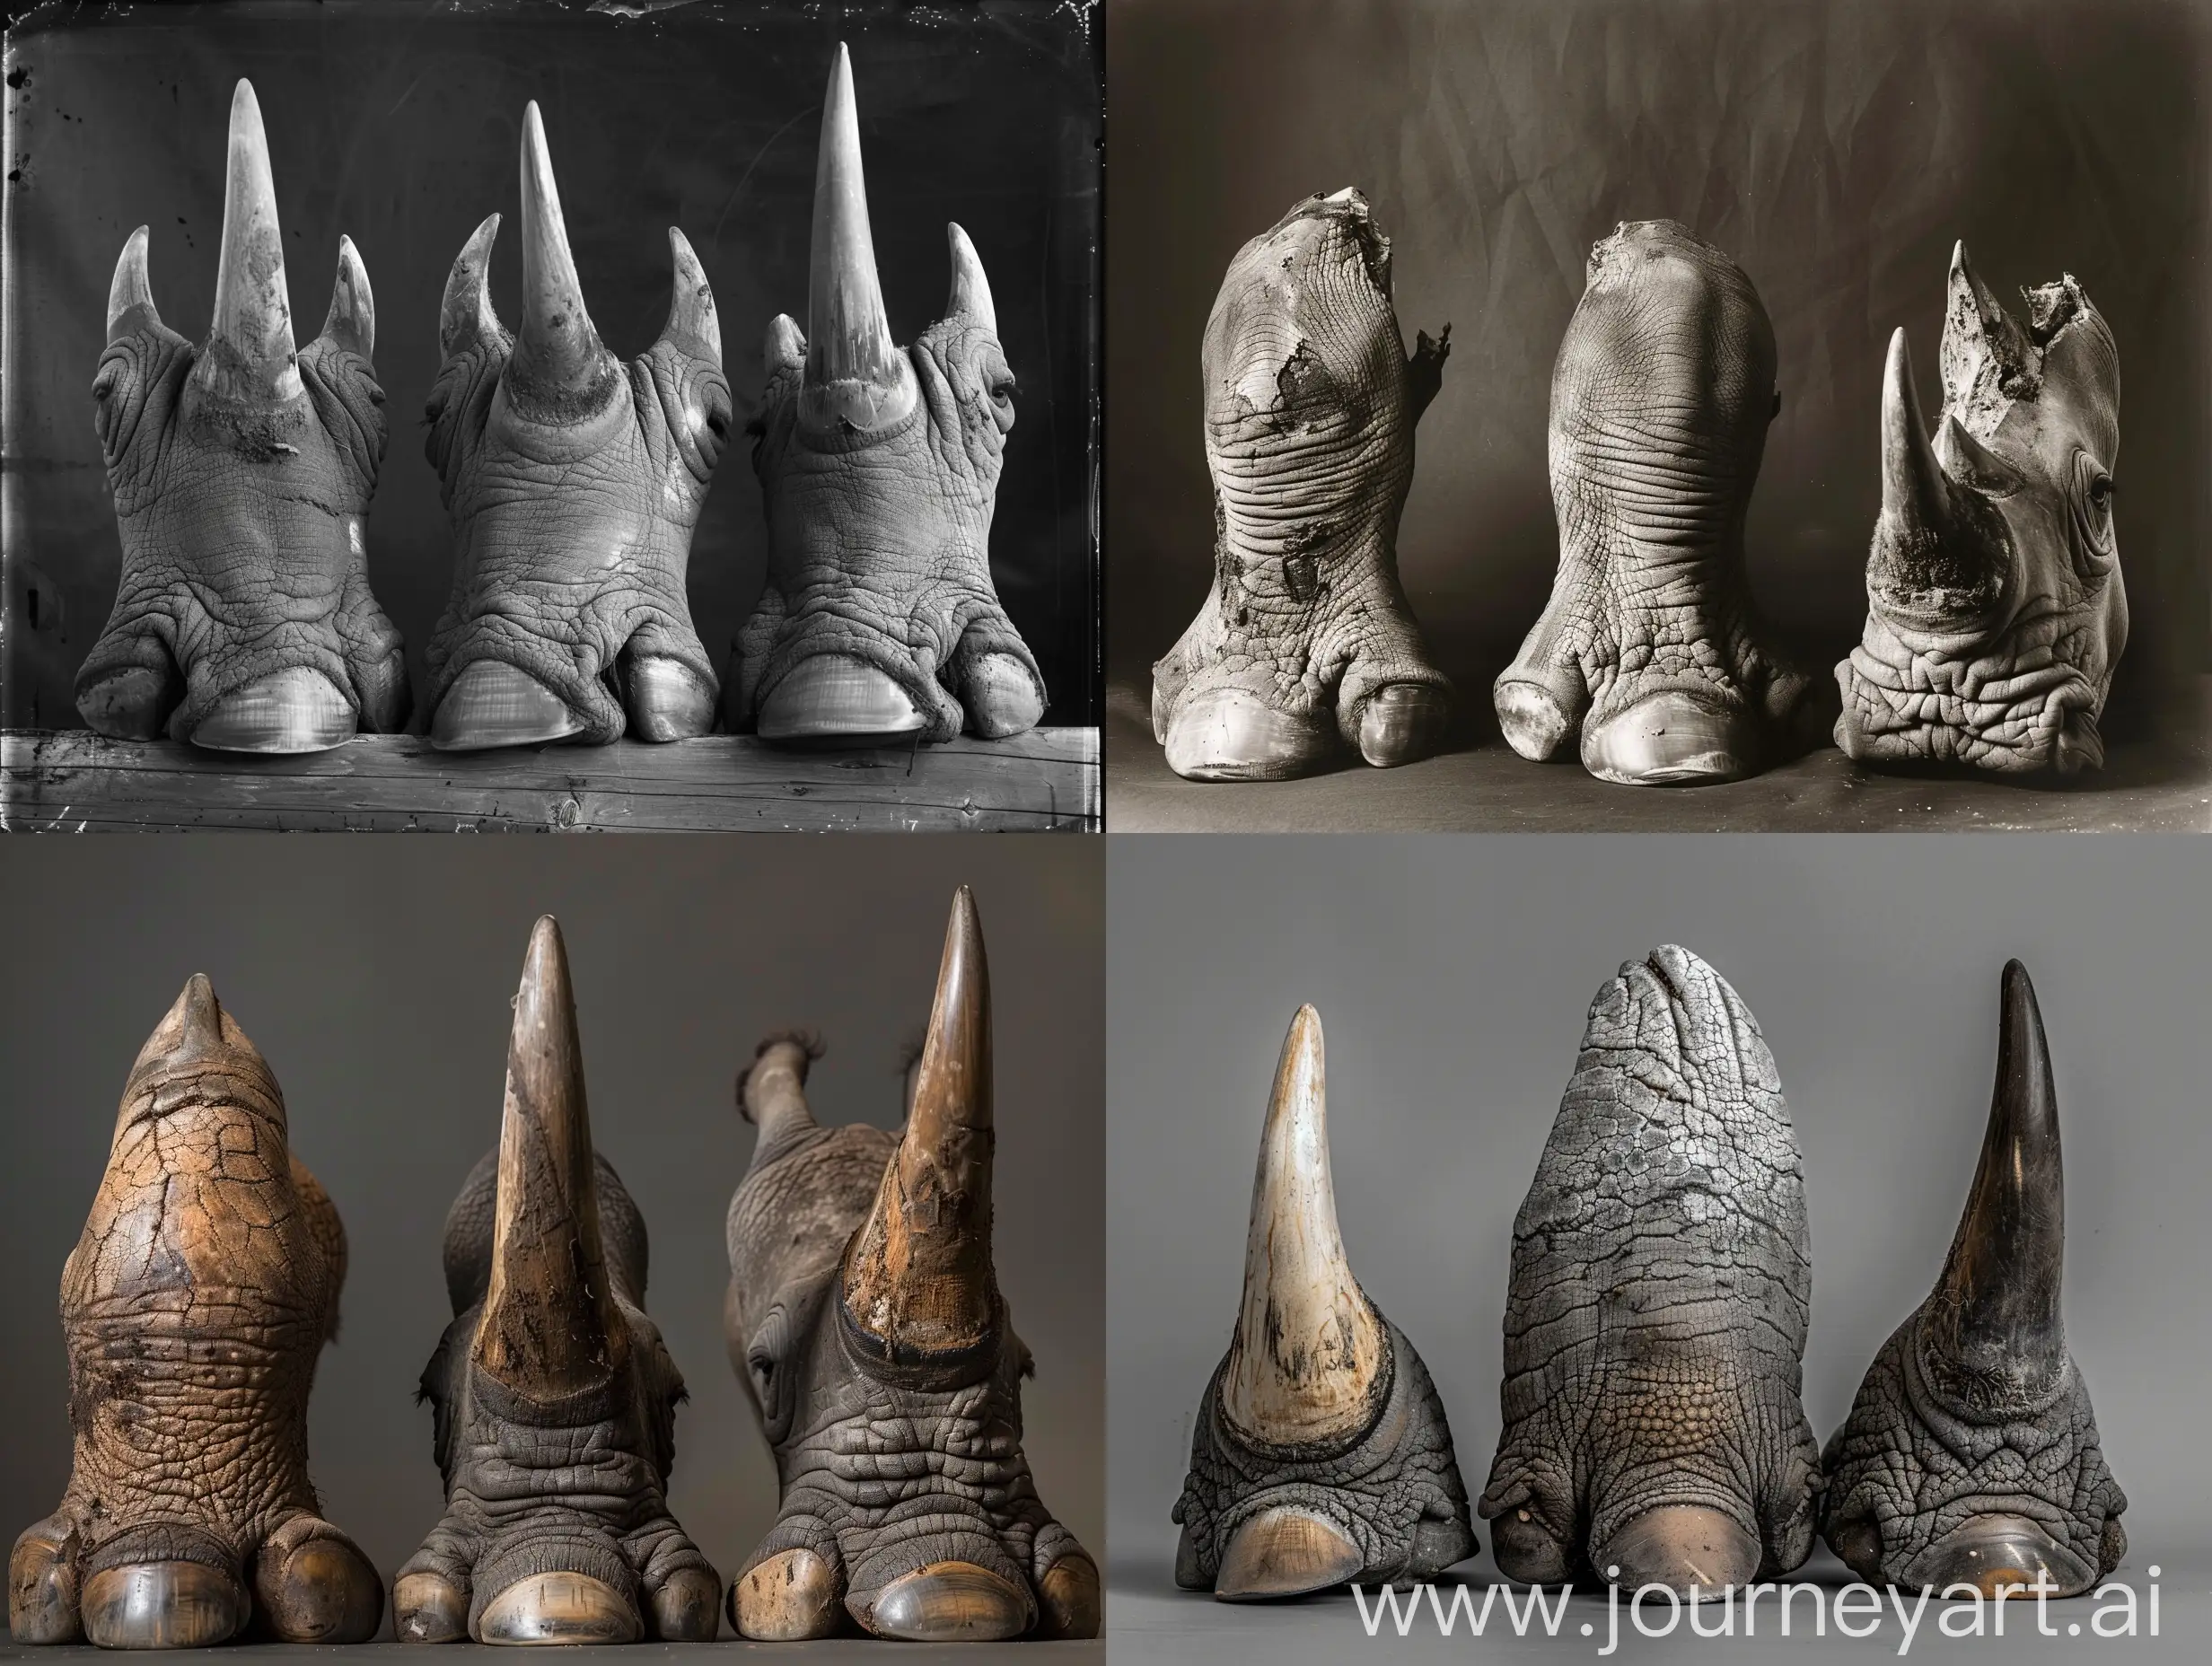 Real documentary photos depicting three rhino hooves (specimens) from a male rhino, a female rhino, and a calf.